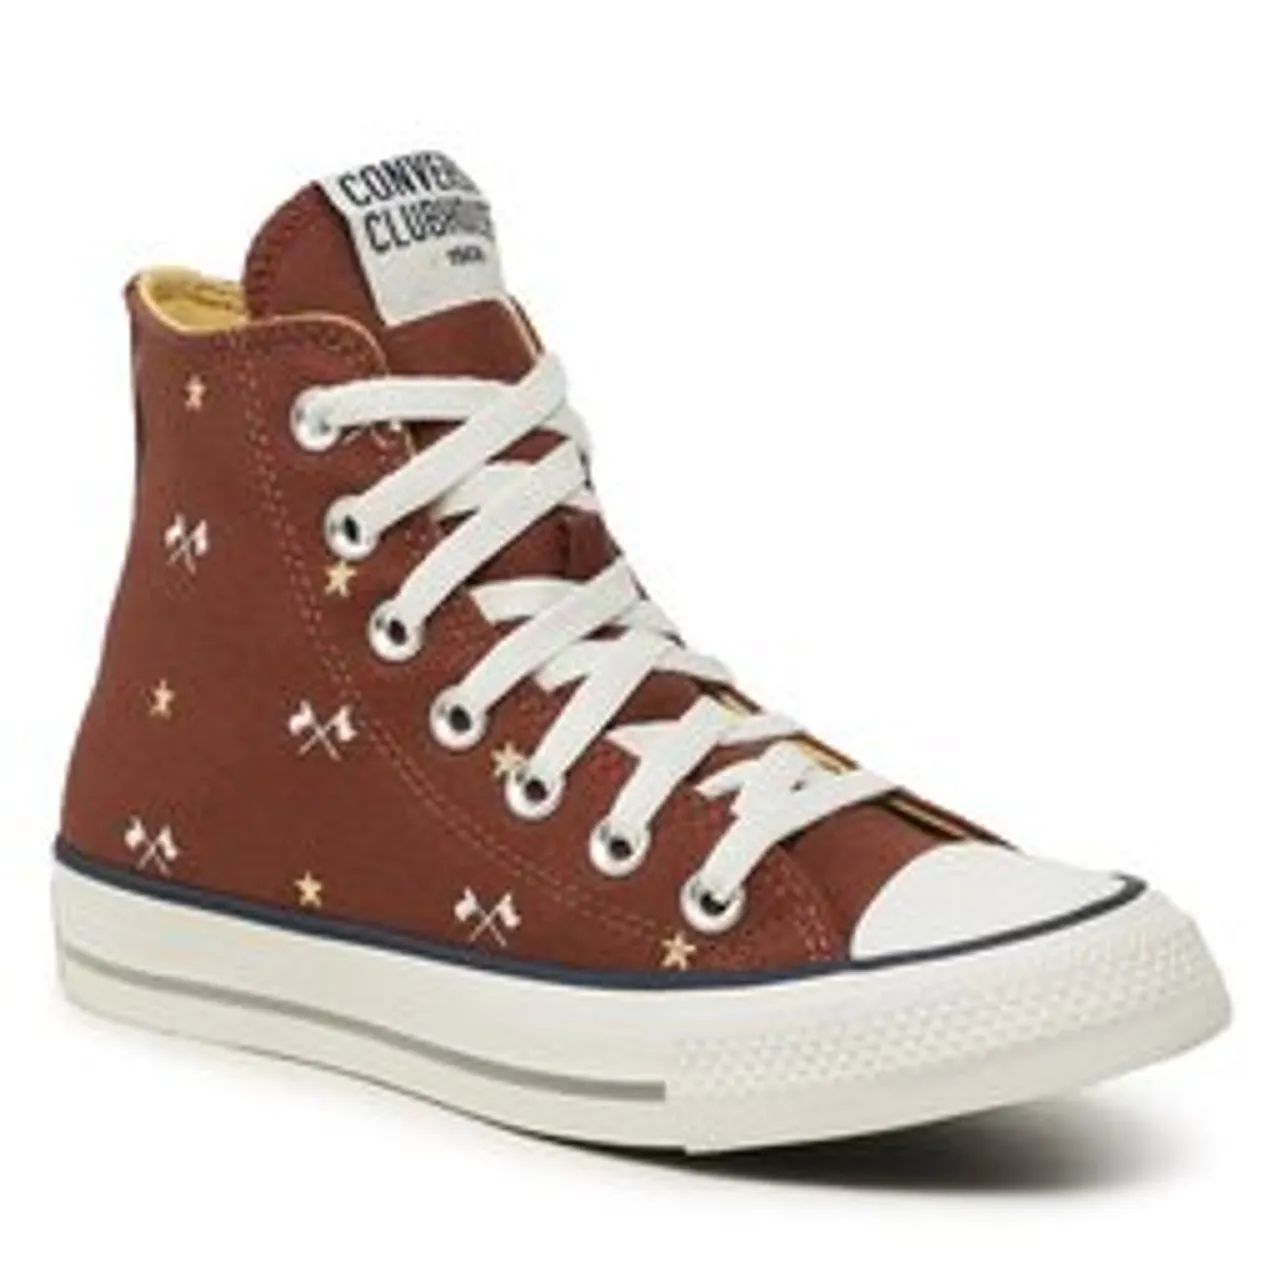 Sneakers aus Stoff Converse Chuck Taylor All Star A03403C Burgundy